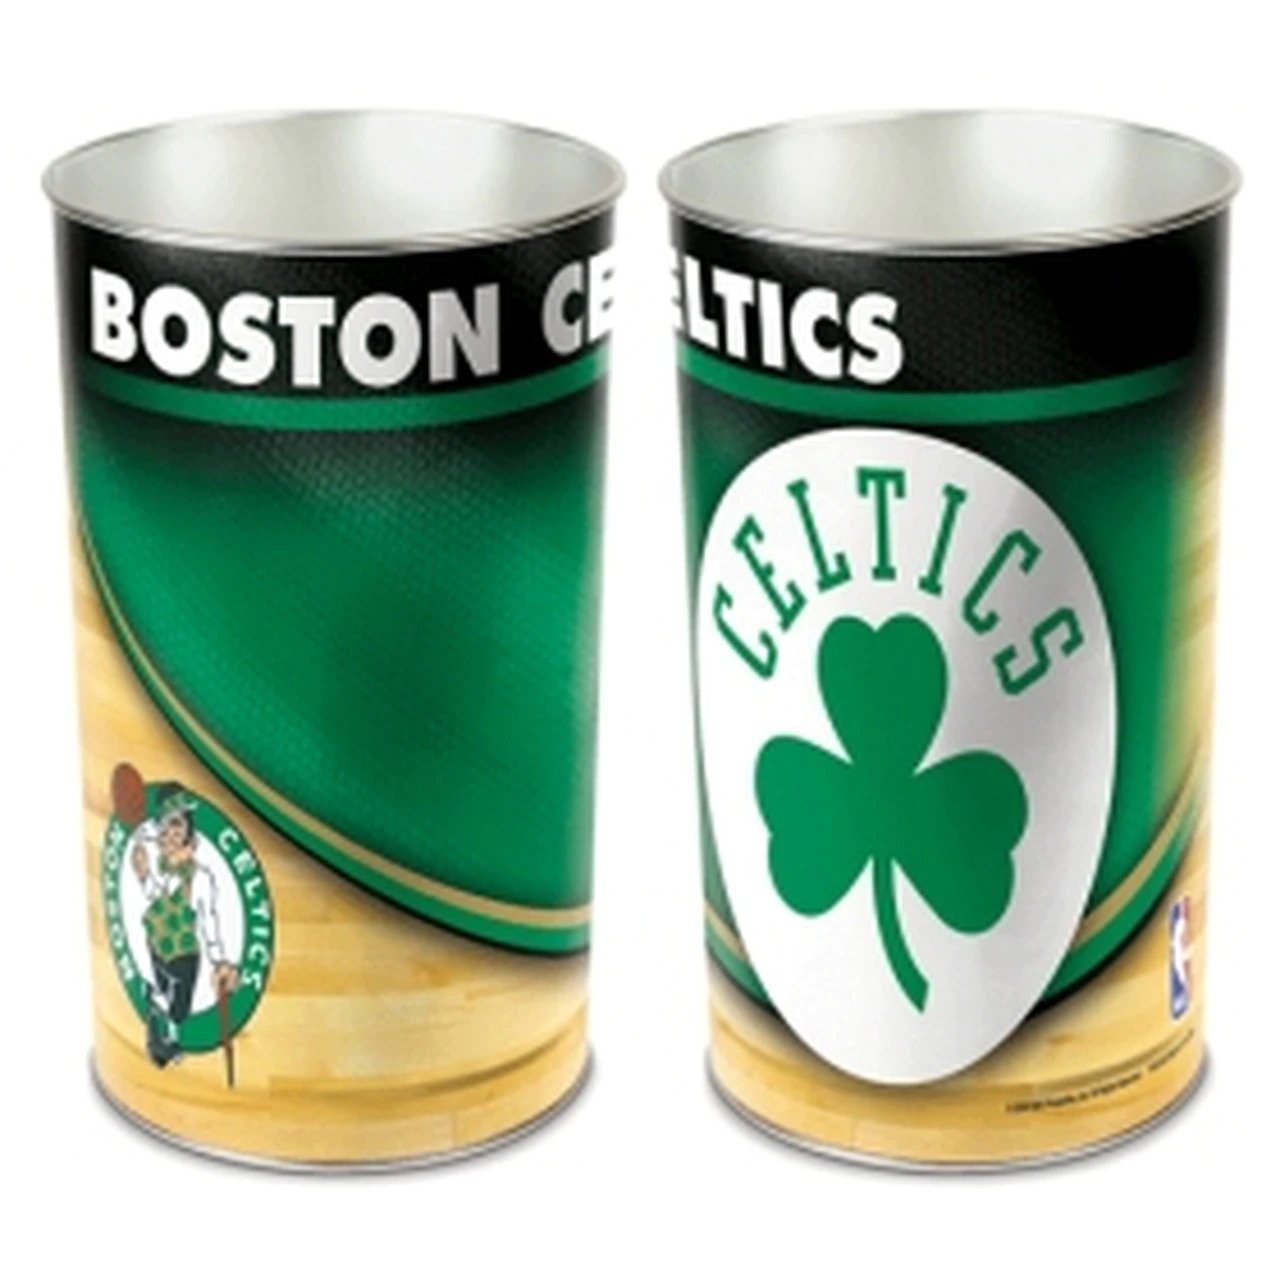 Boston Celtics metal wastebasket with team colors and graphics measures 15 inches tall & 10 inches wide at top